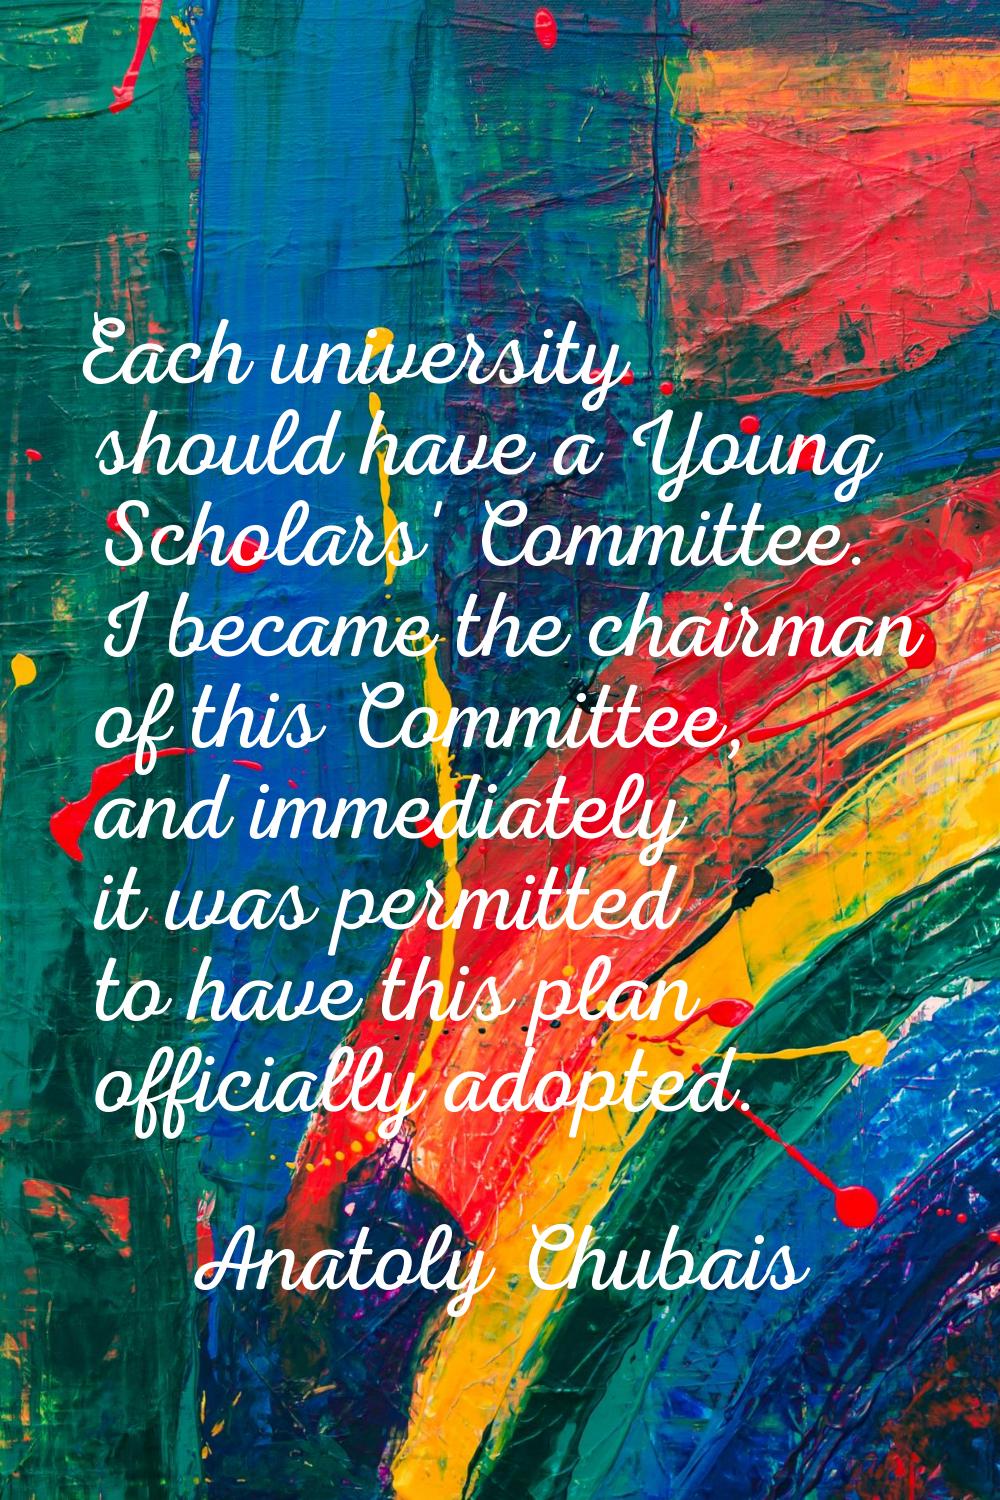 Each university should have a Young Scholars' Committee. I became the chairman of this Committee, a